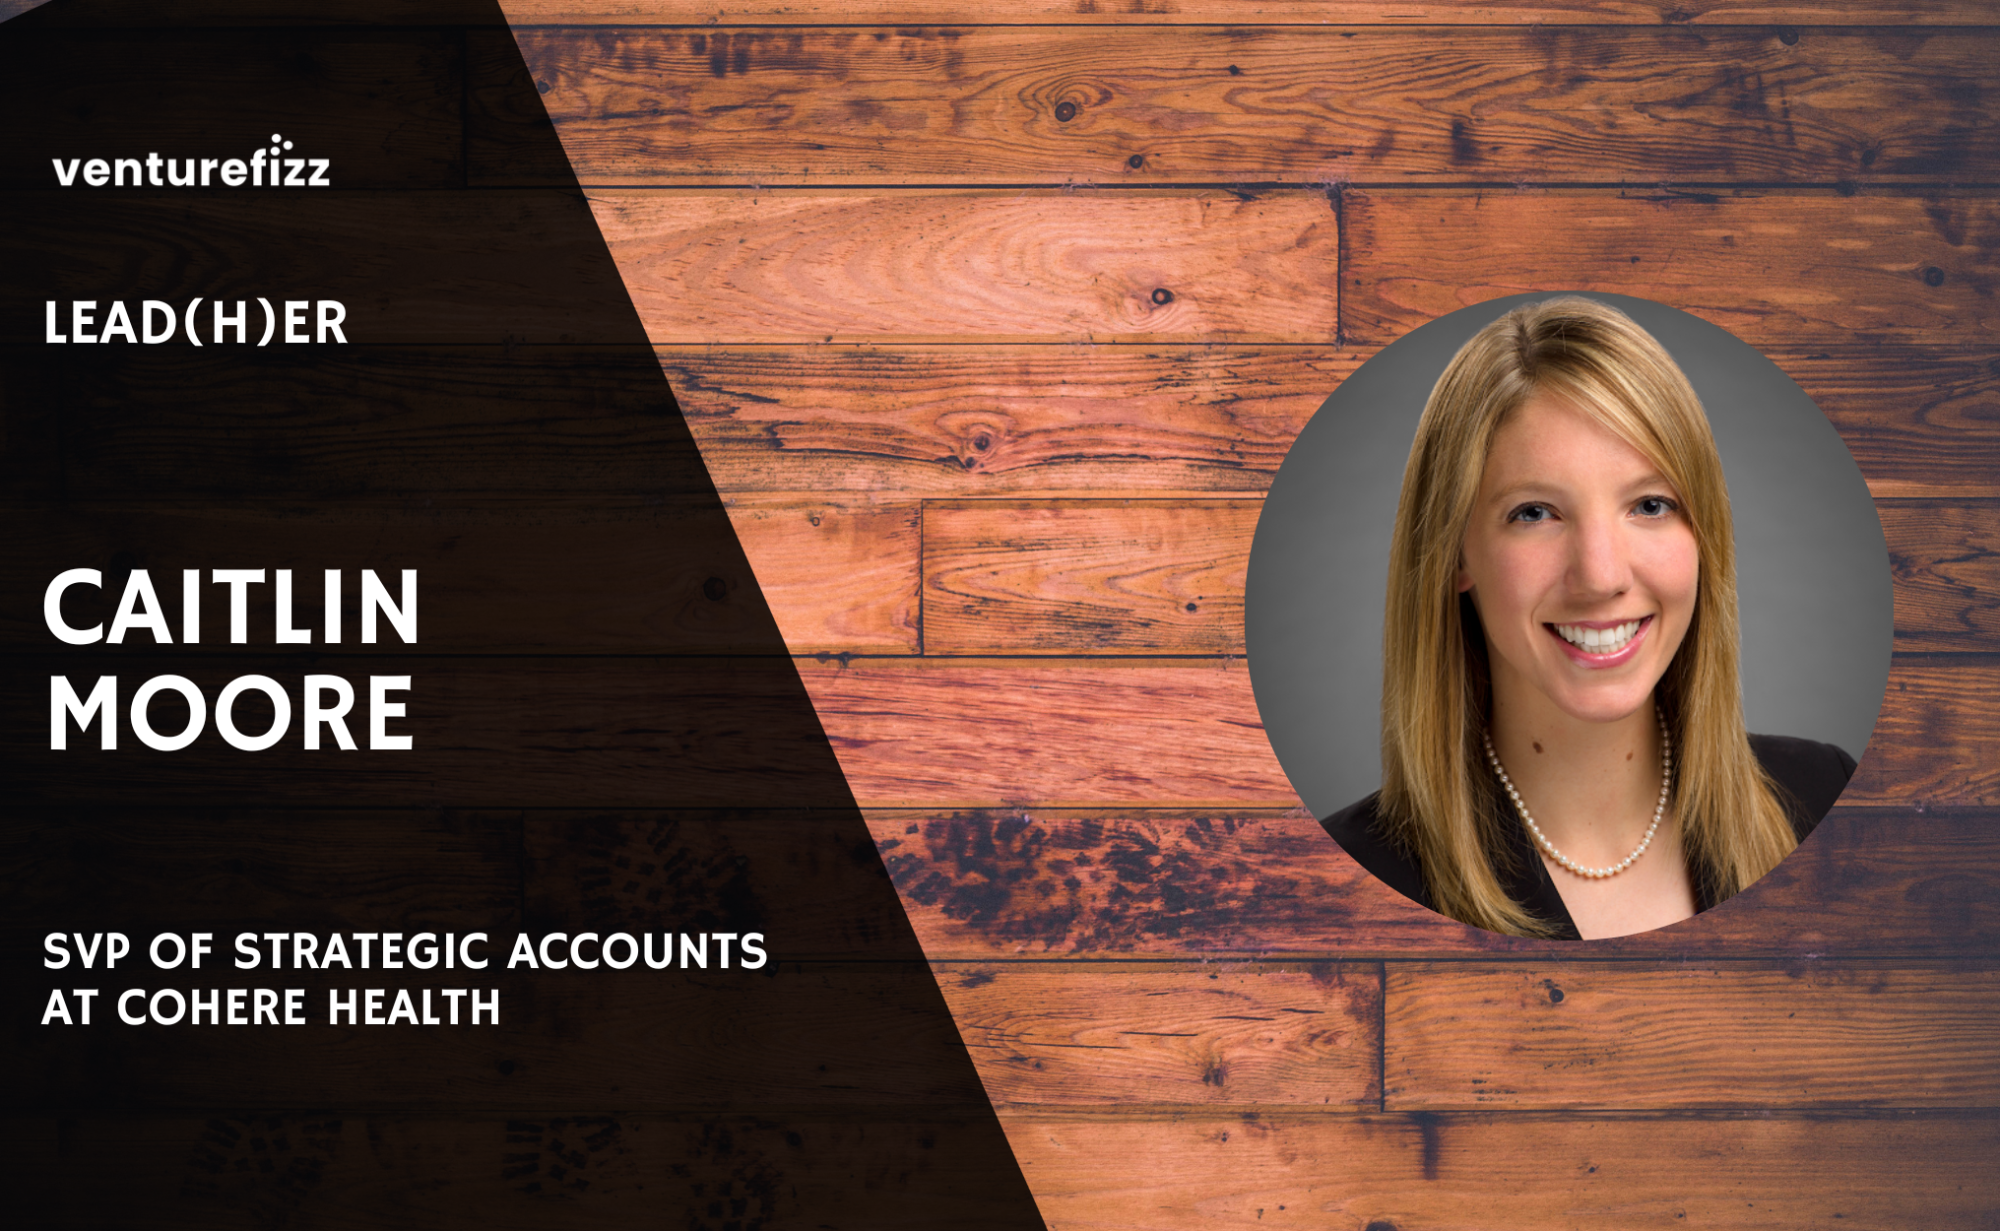 Lead(H)er Profile - Caitlin Moore, SVP of Strategic Accounts at Cohere Health banner image